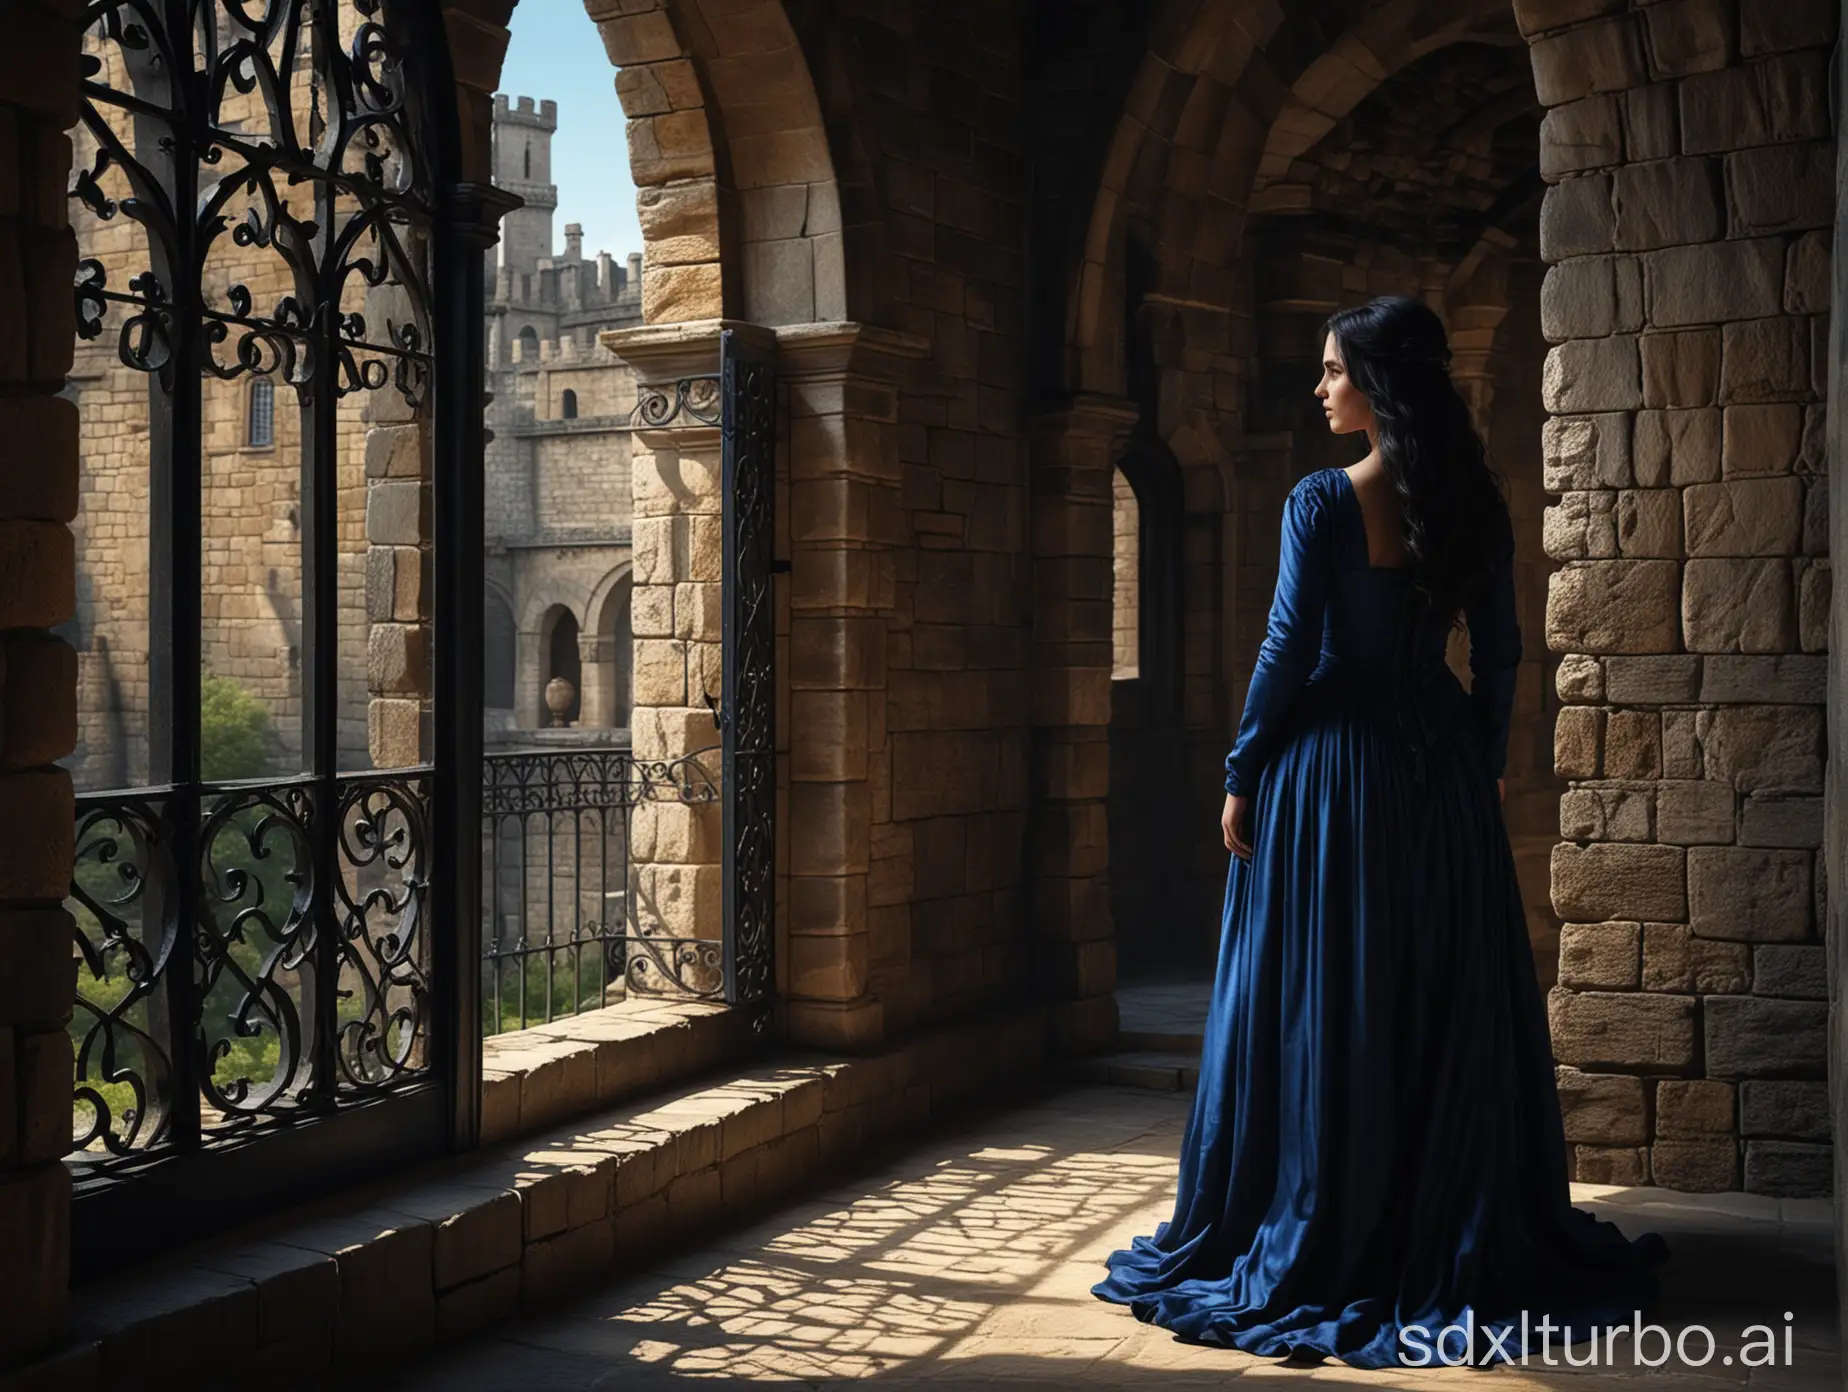 Medieval-Maiden-Contemplating-by-Castle-Window